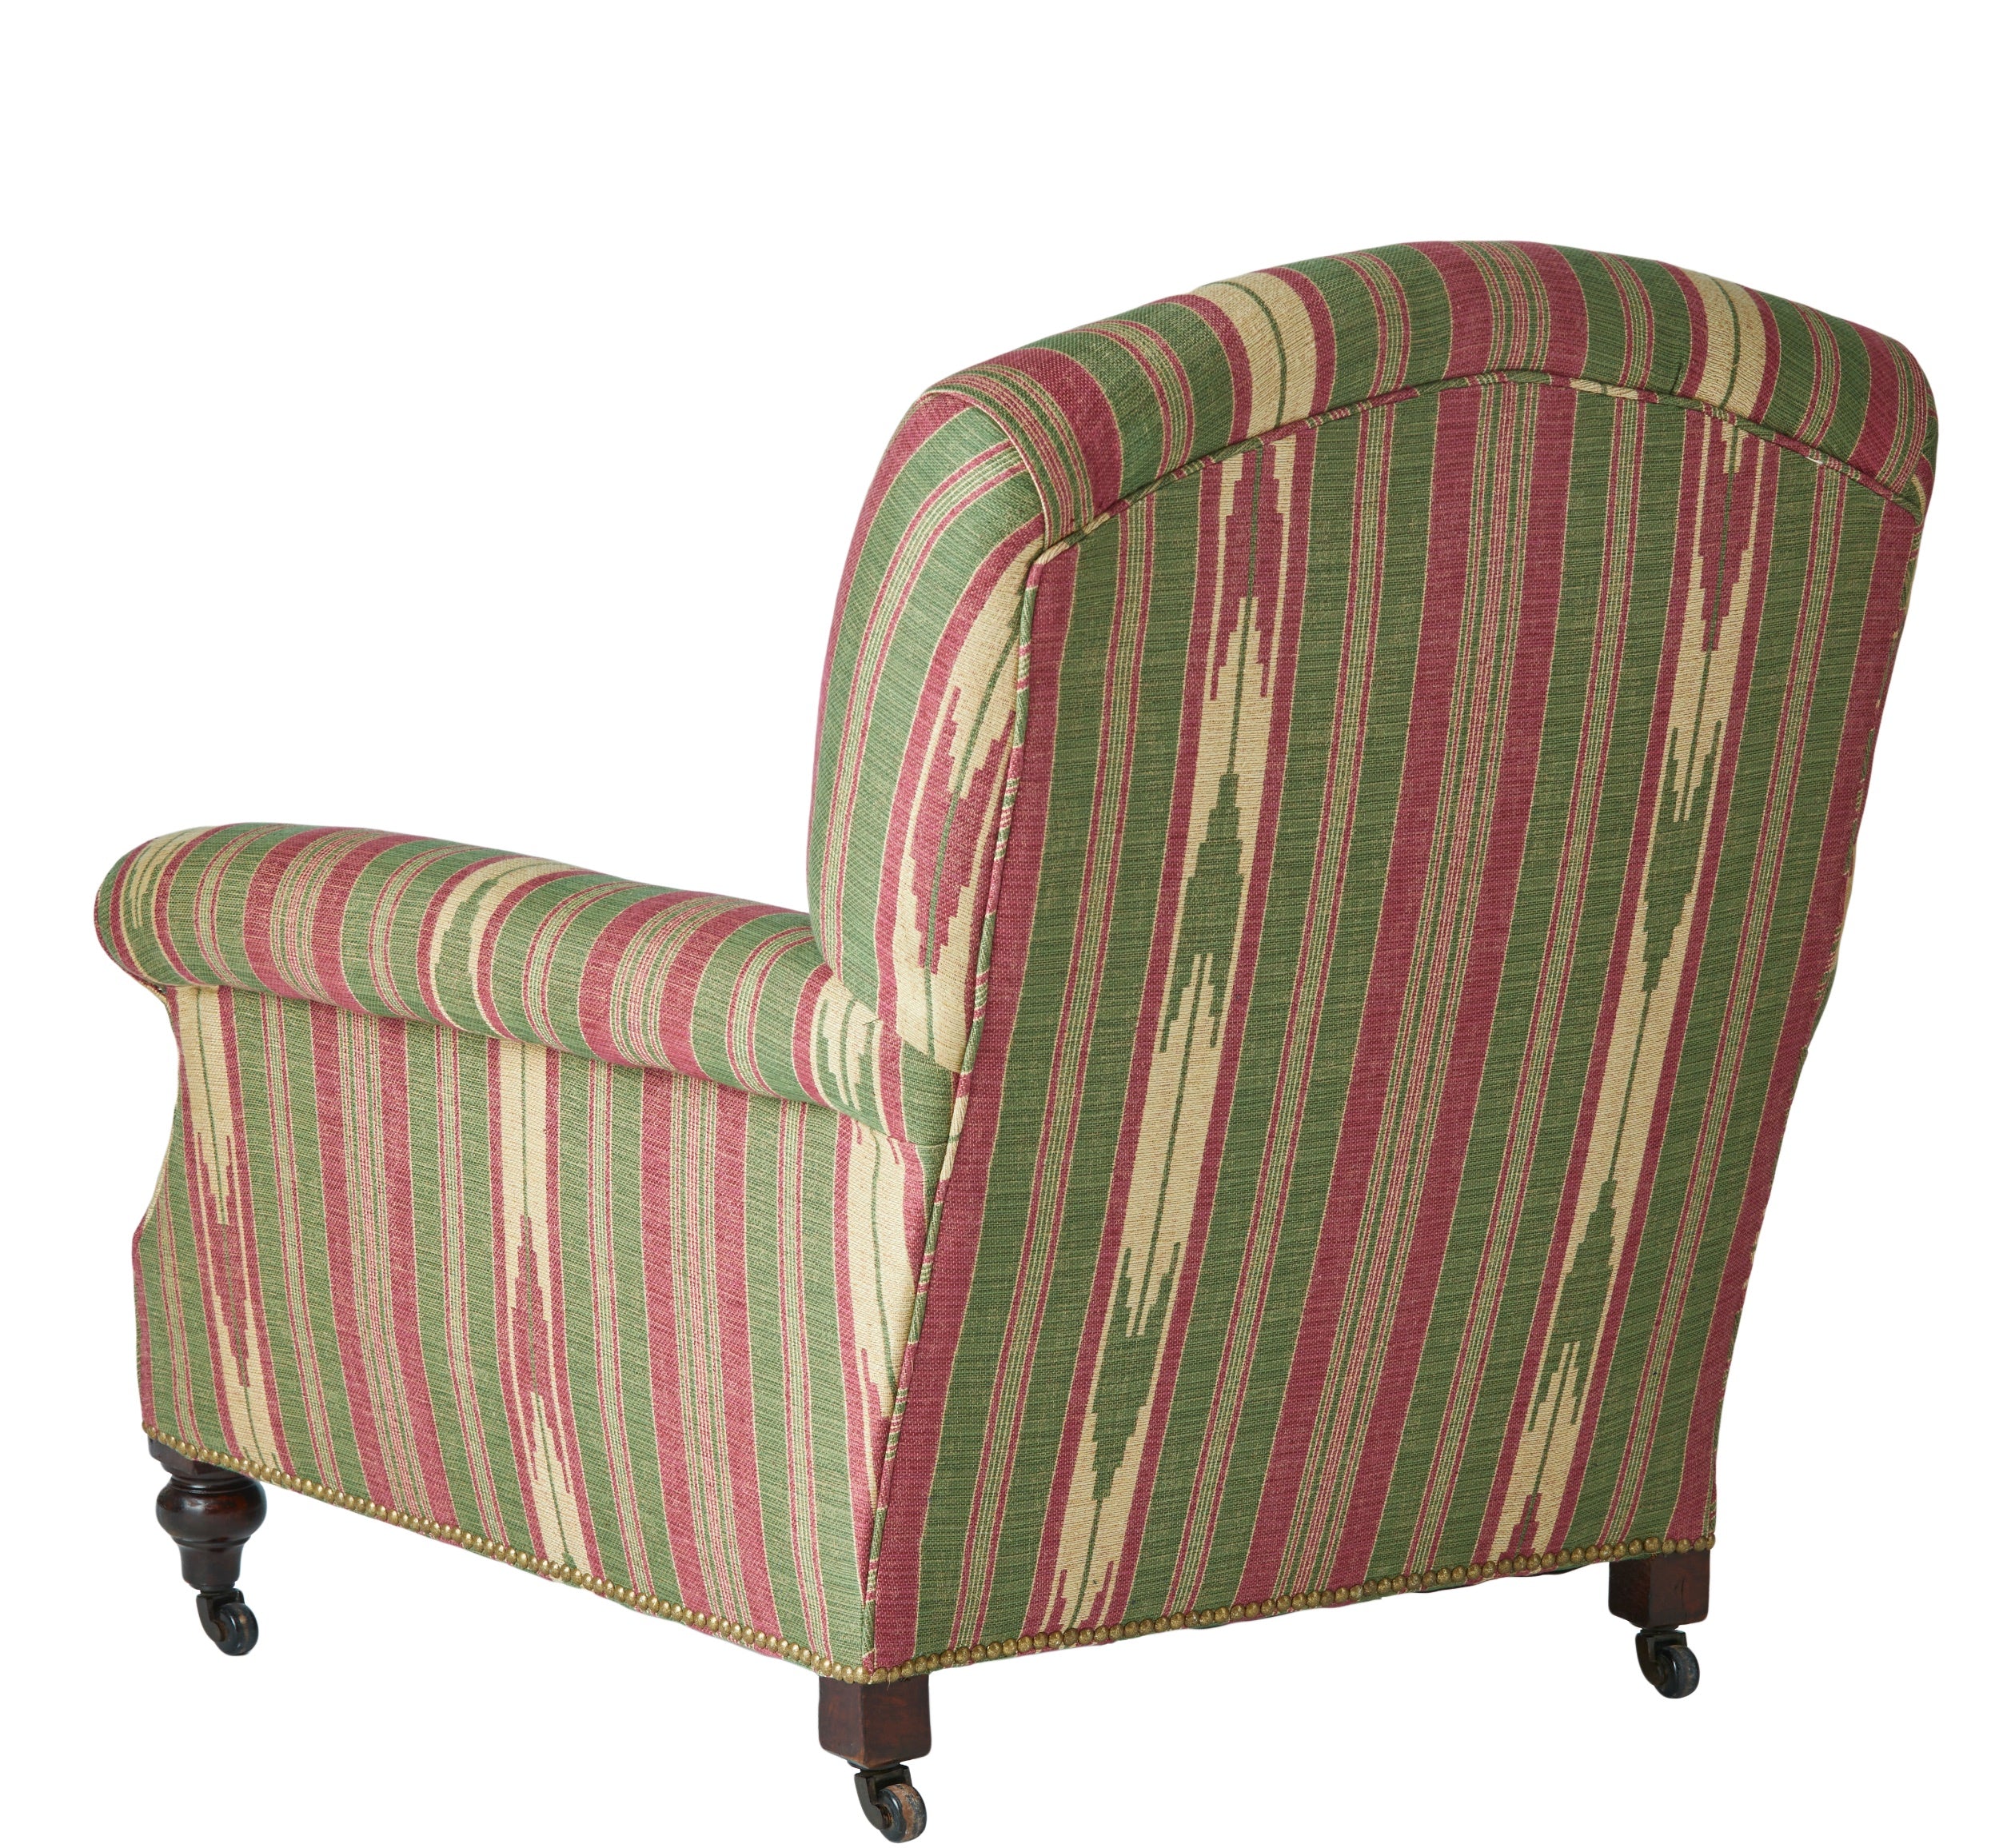 A Late 19th Century Low Armchair in Flora Soames Oulton Stripe